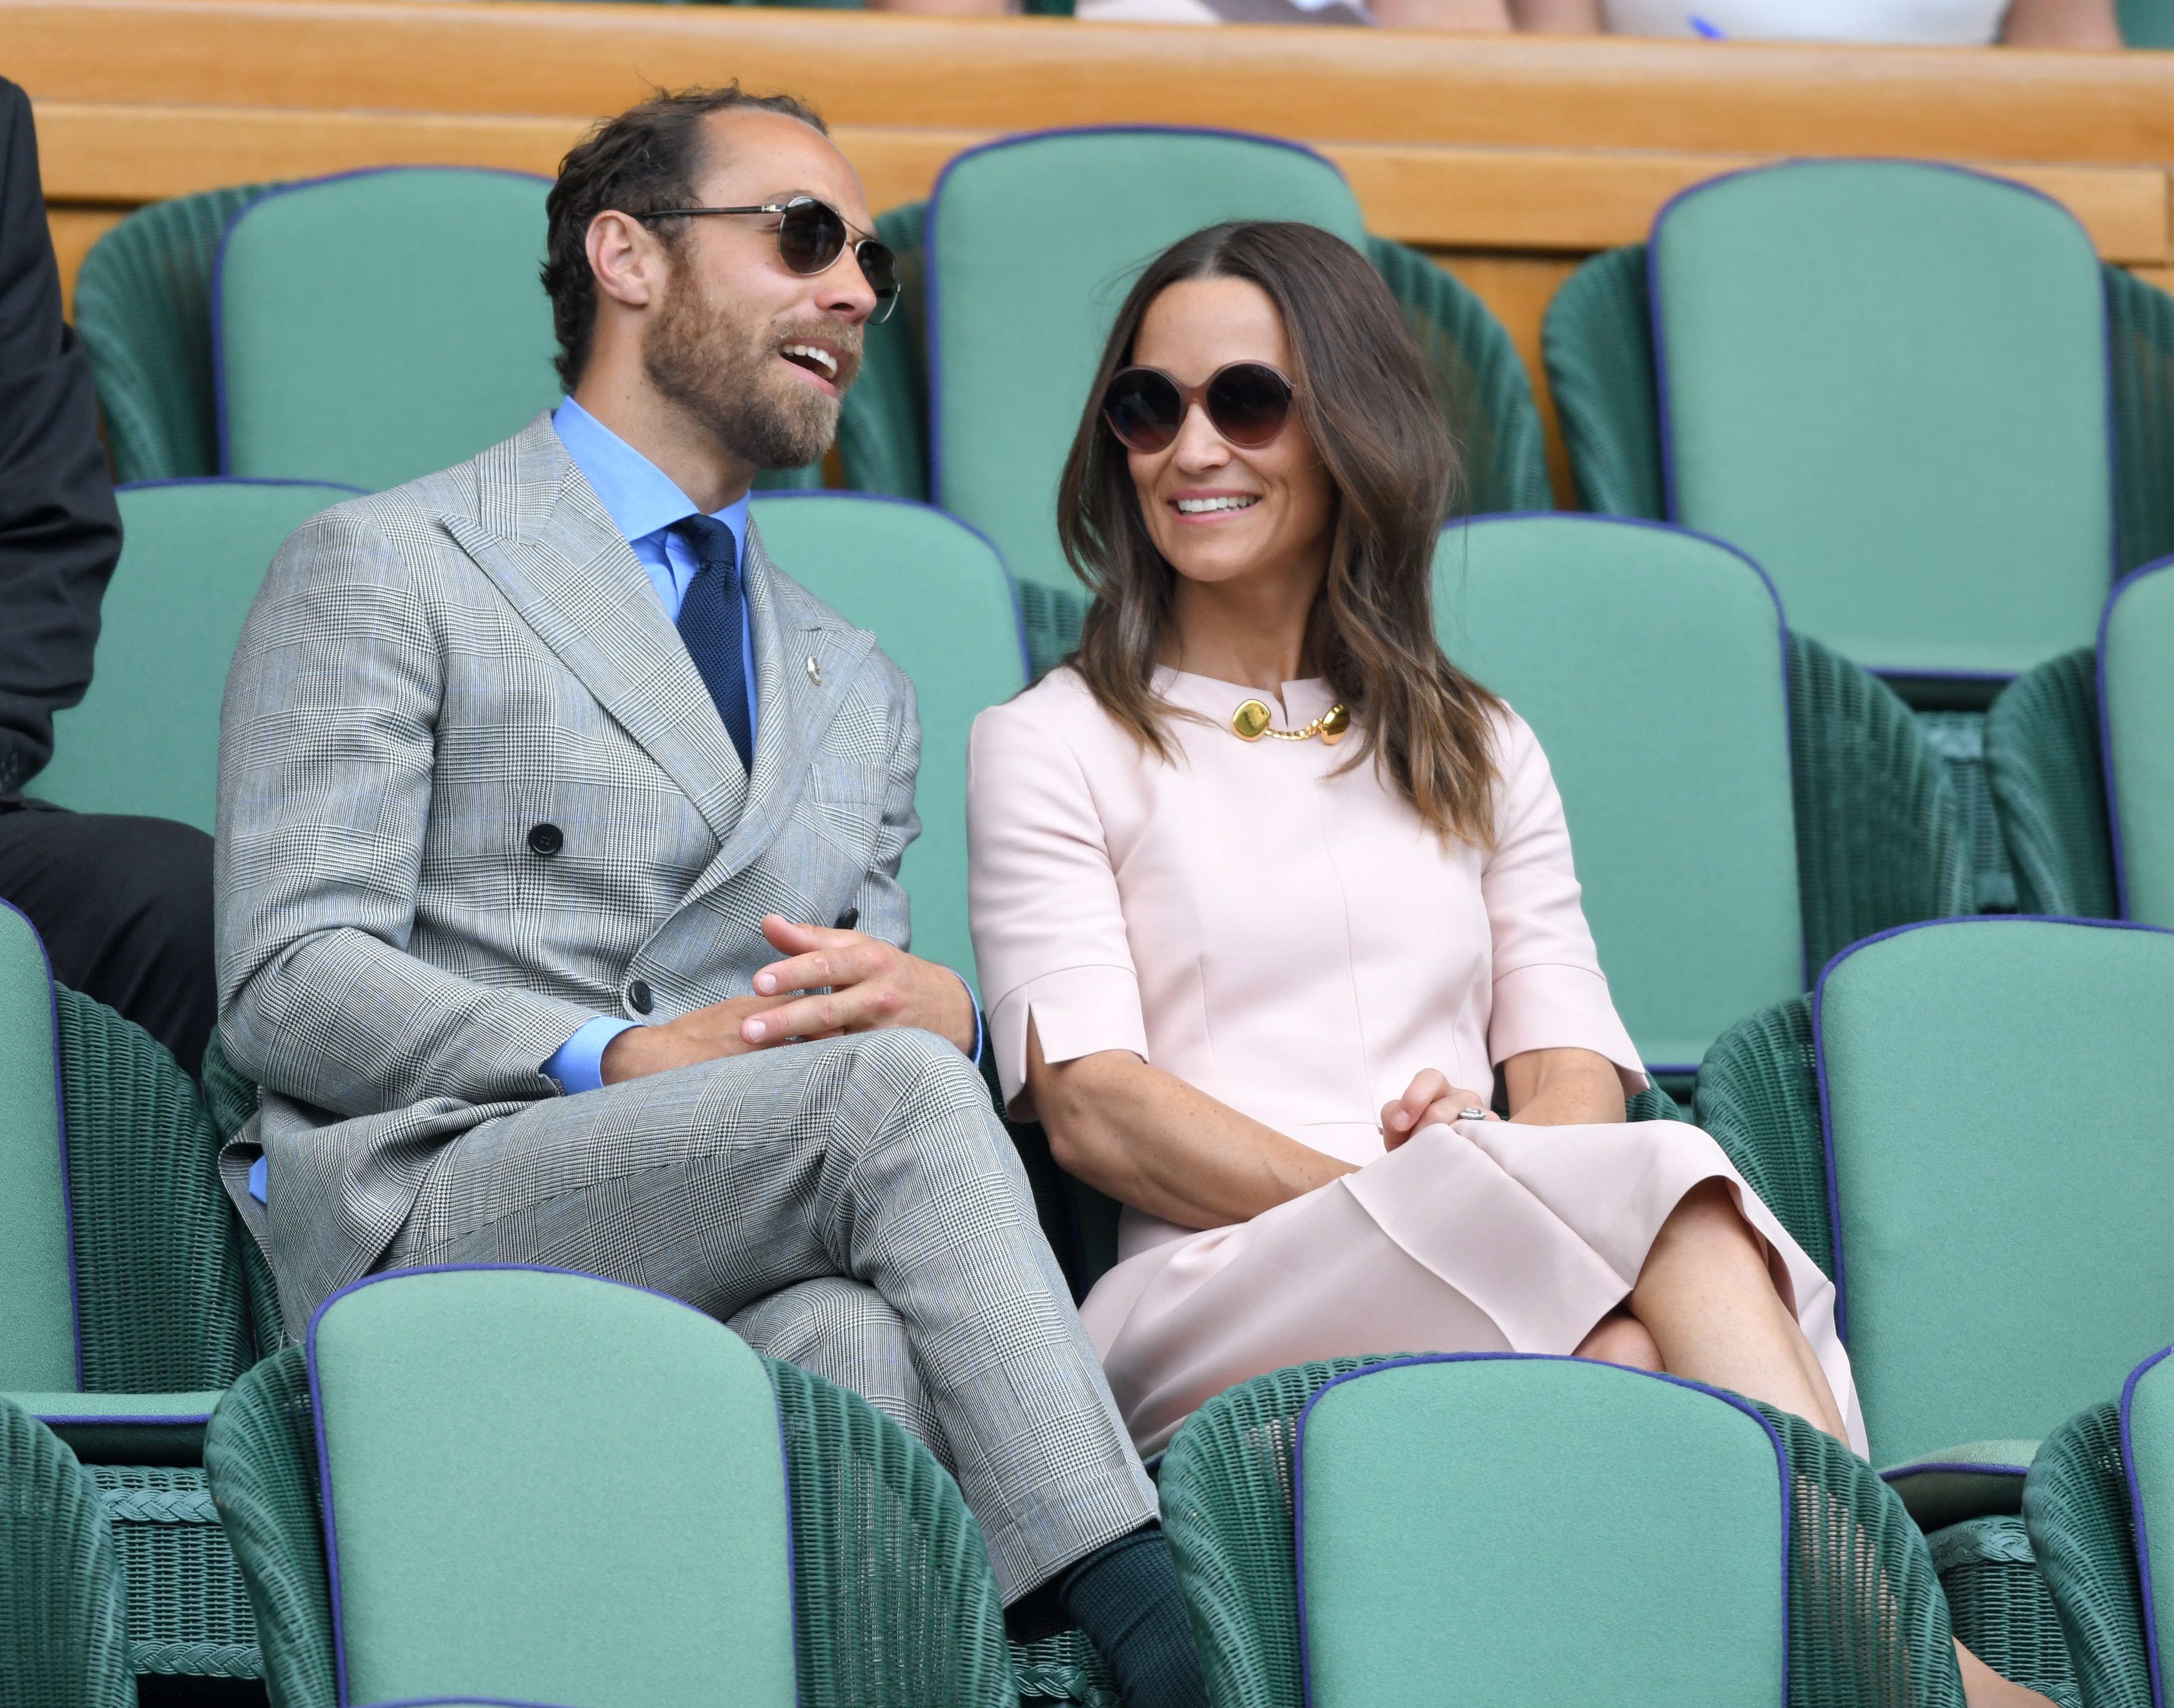 ames Middleton and Pippa Middleton attend day seven of the Wimbledon Tennis Championships | Source: Getty Images